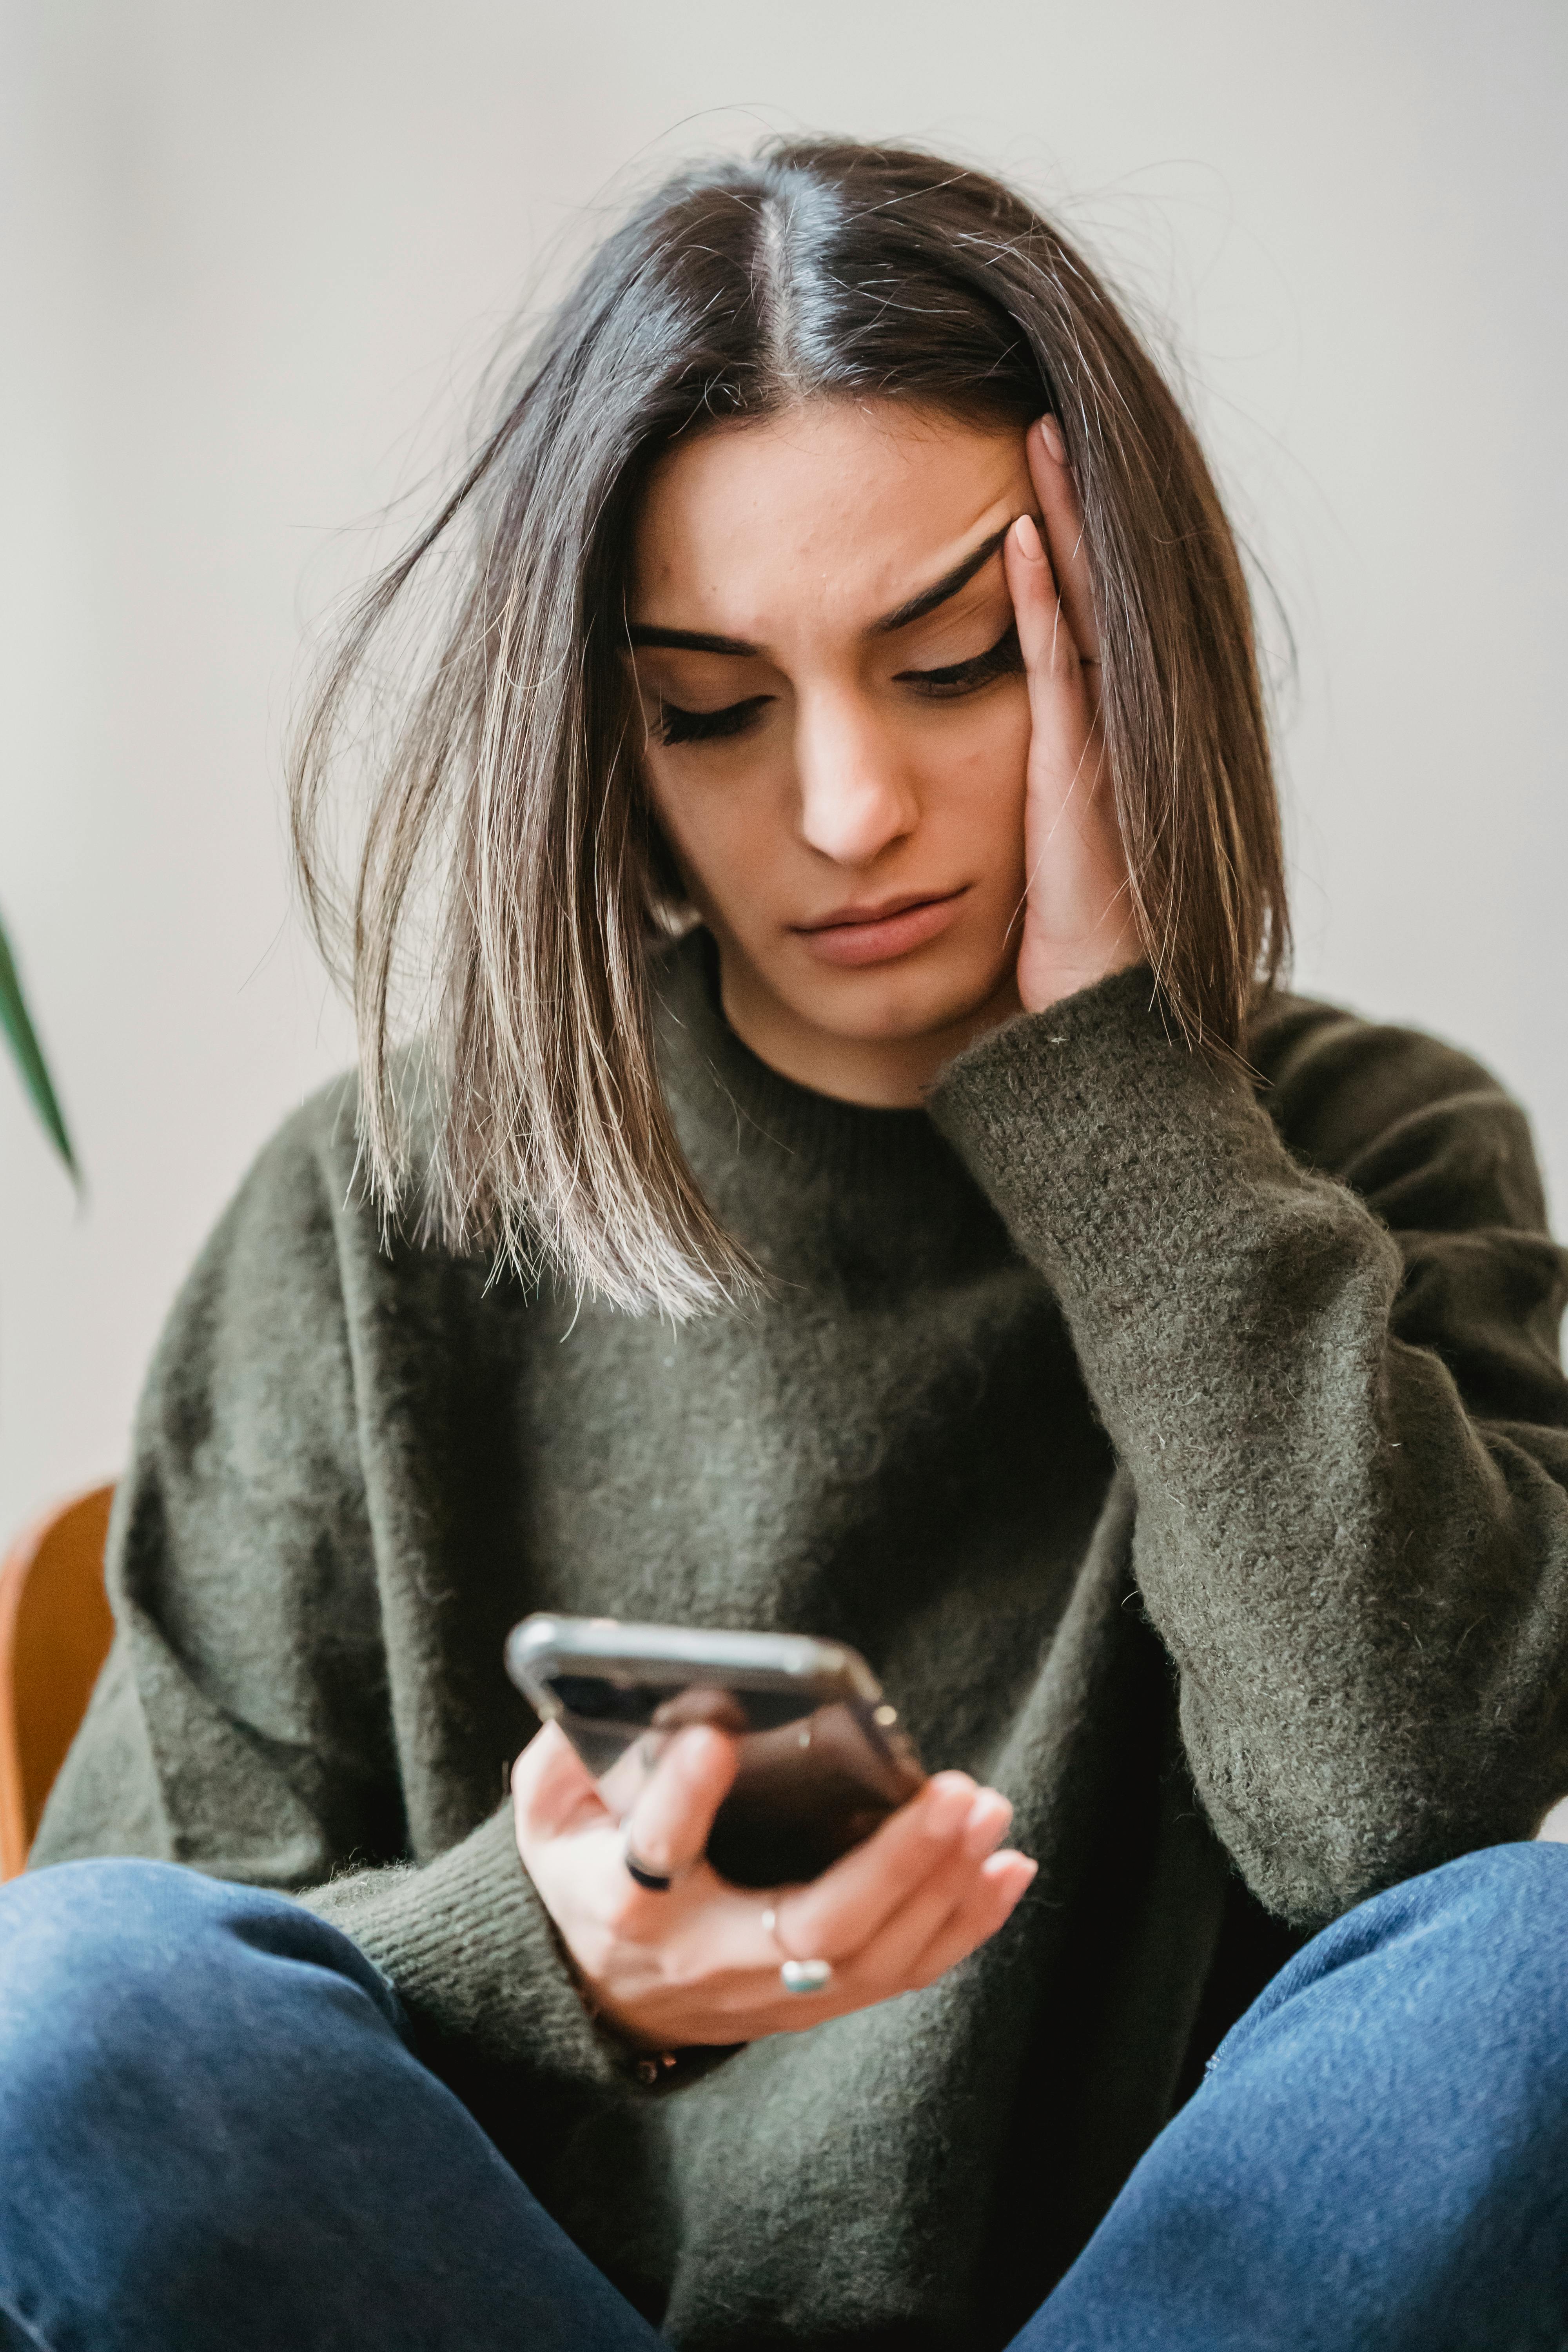 A woman looking unhappy while looking at her phone | Source: Pexels